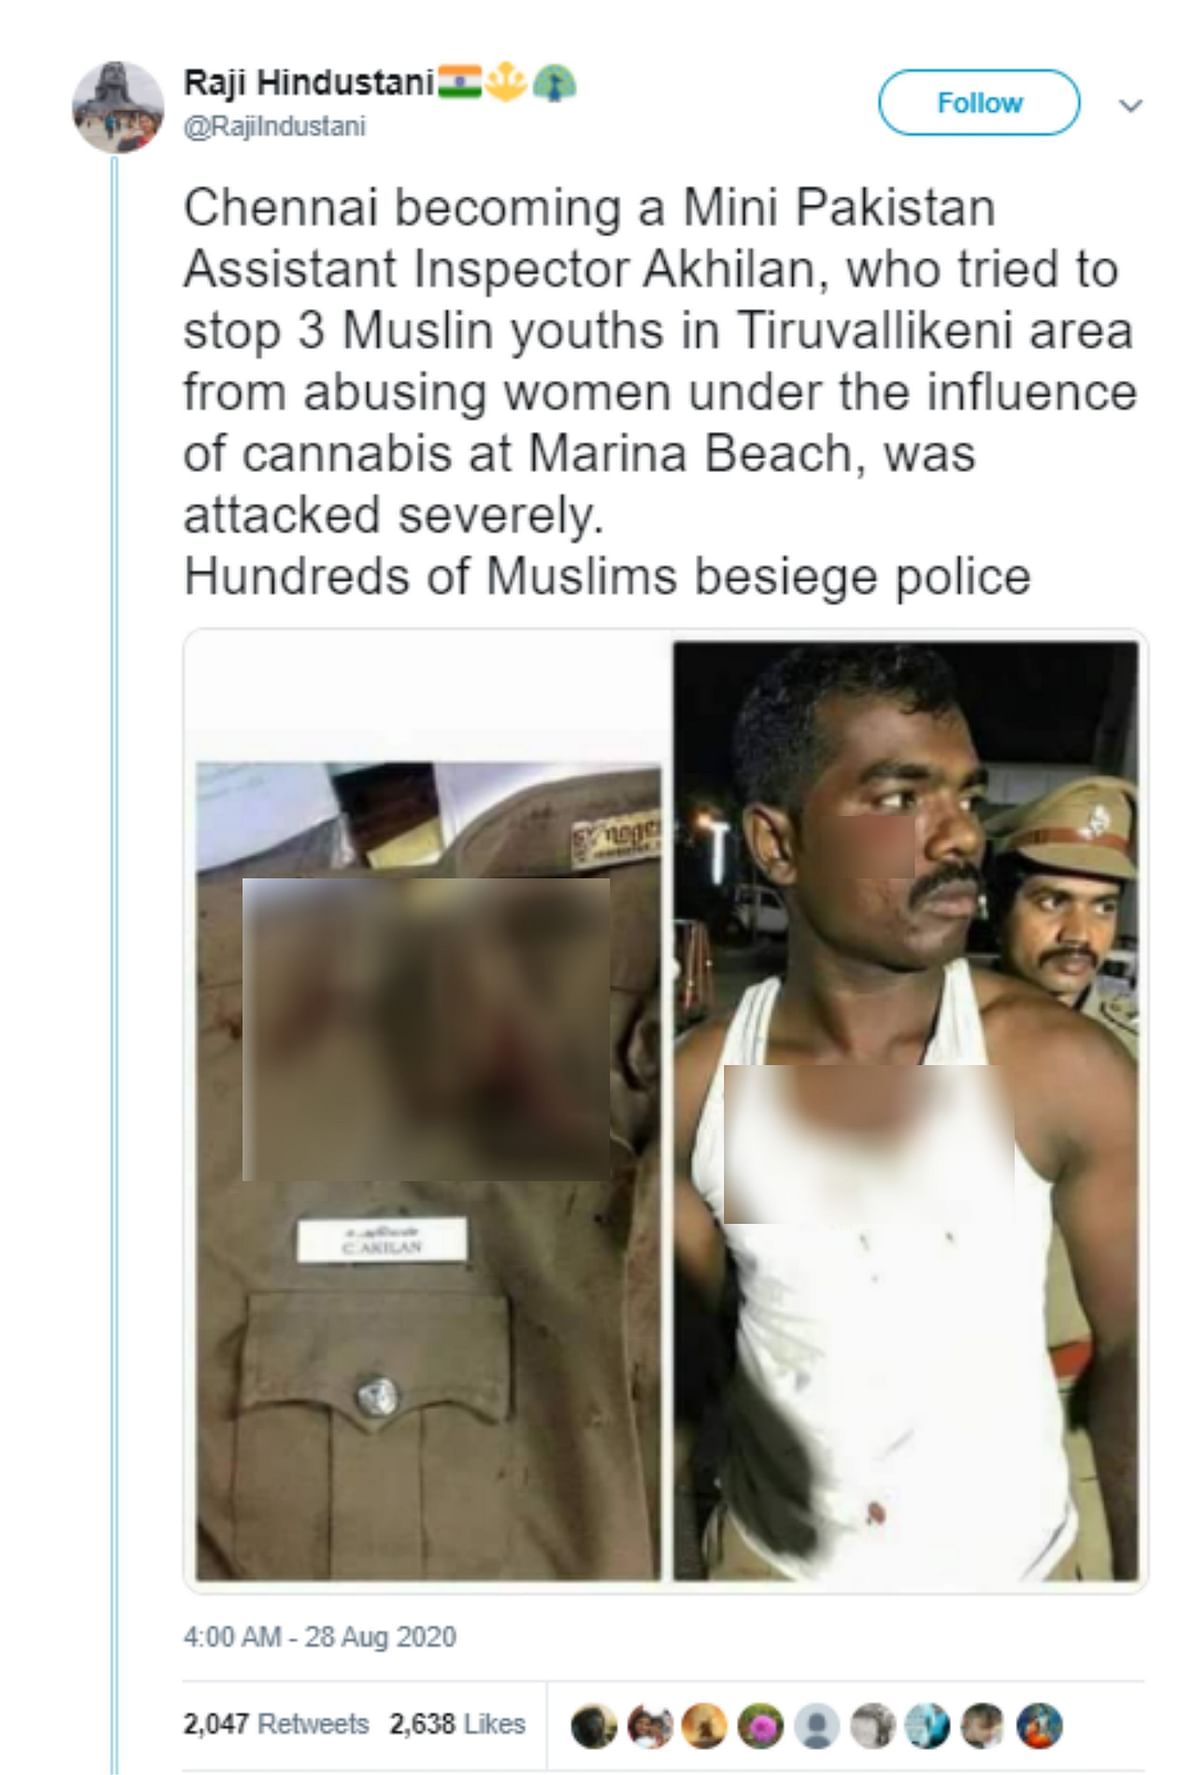 The incident took place in 2017 and has resurfaced with a false communal spin. The attackers were actually Hindu.